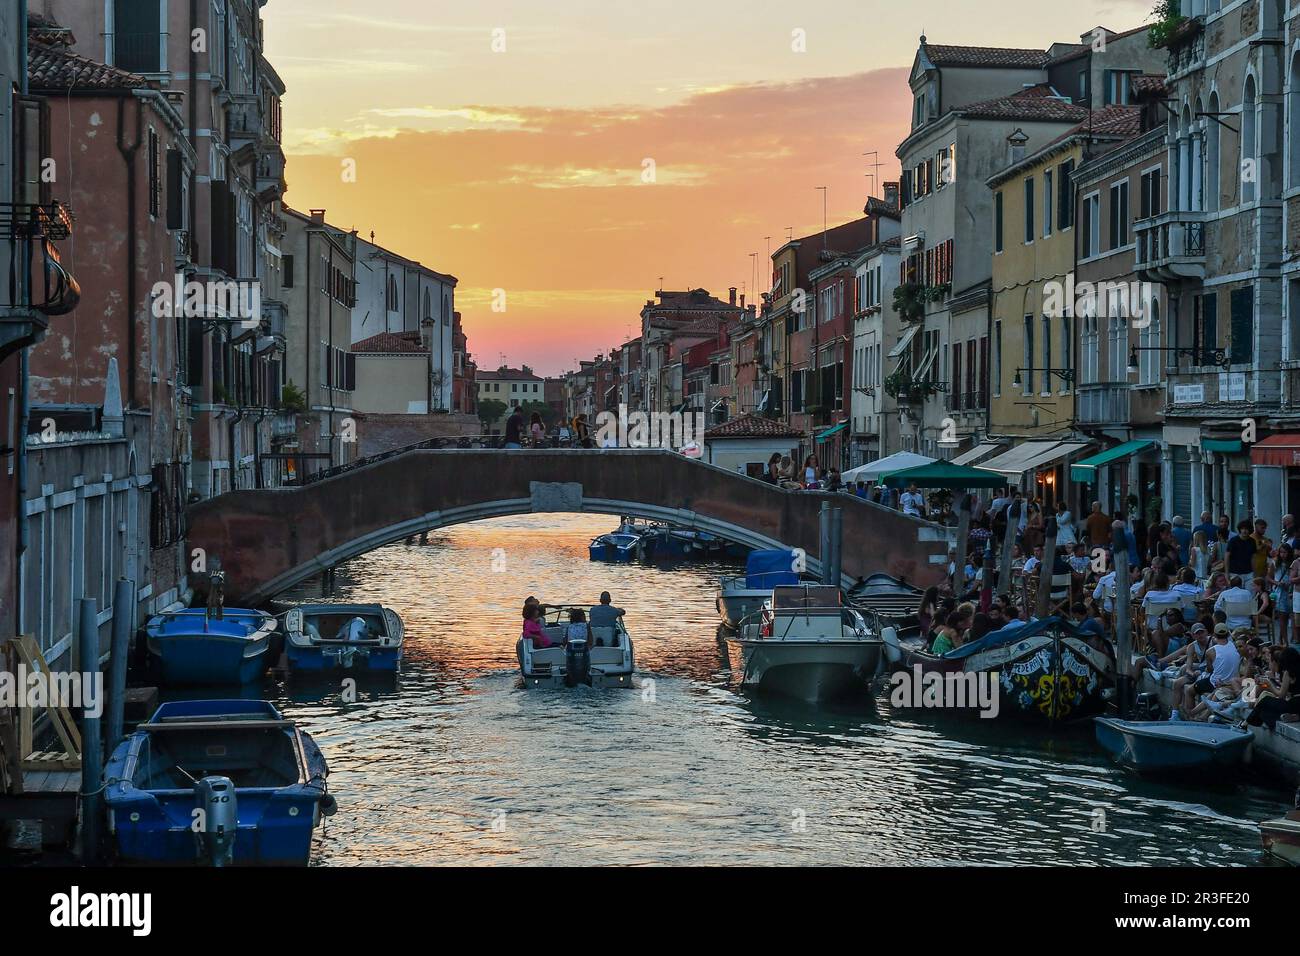 Bridge and Fondamenta dei Ormesini waterfront overlooking Rio della Misericordia canal, crowded with tourists on a summer evening at sunset, Venice Stock Photo